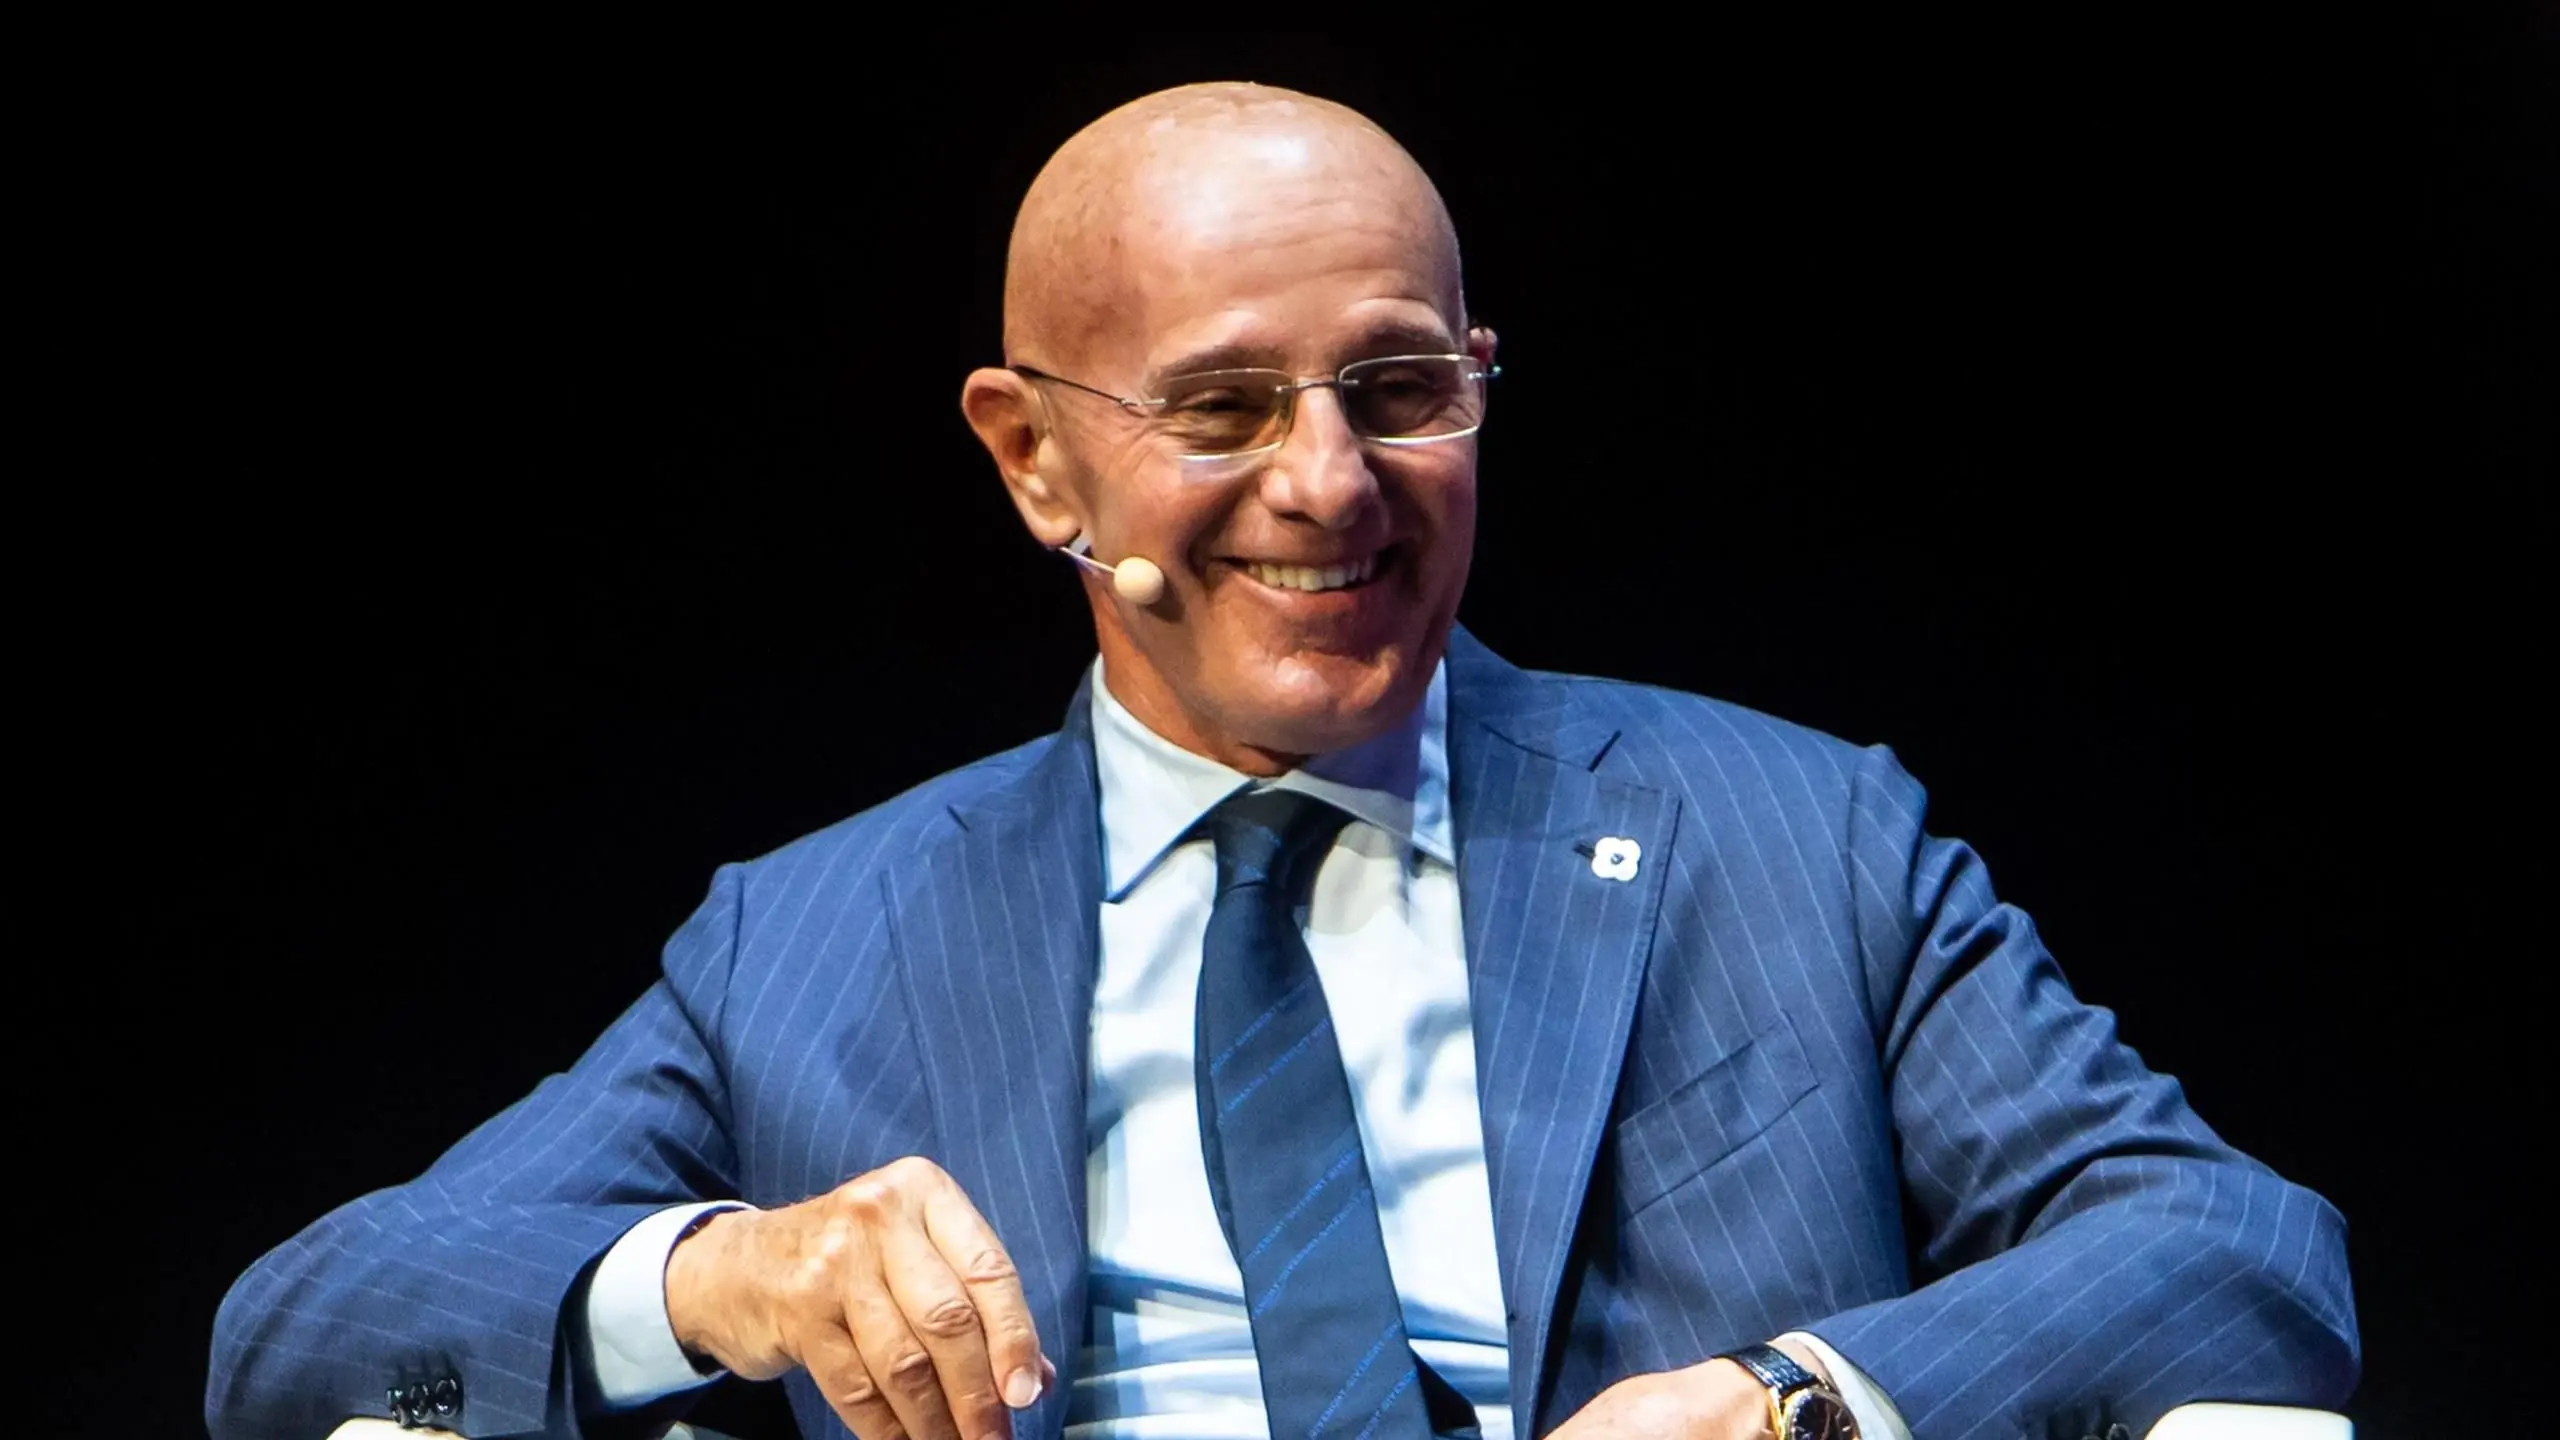 ‘He’s a strategist’ – Ex-AC Milan coach, Sacchi names perfect manager for Liverpool, Barcelona